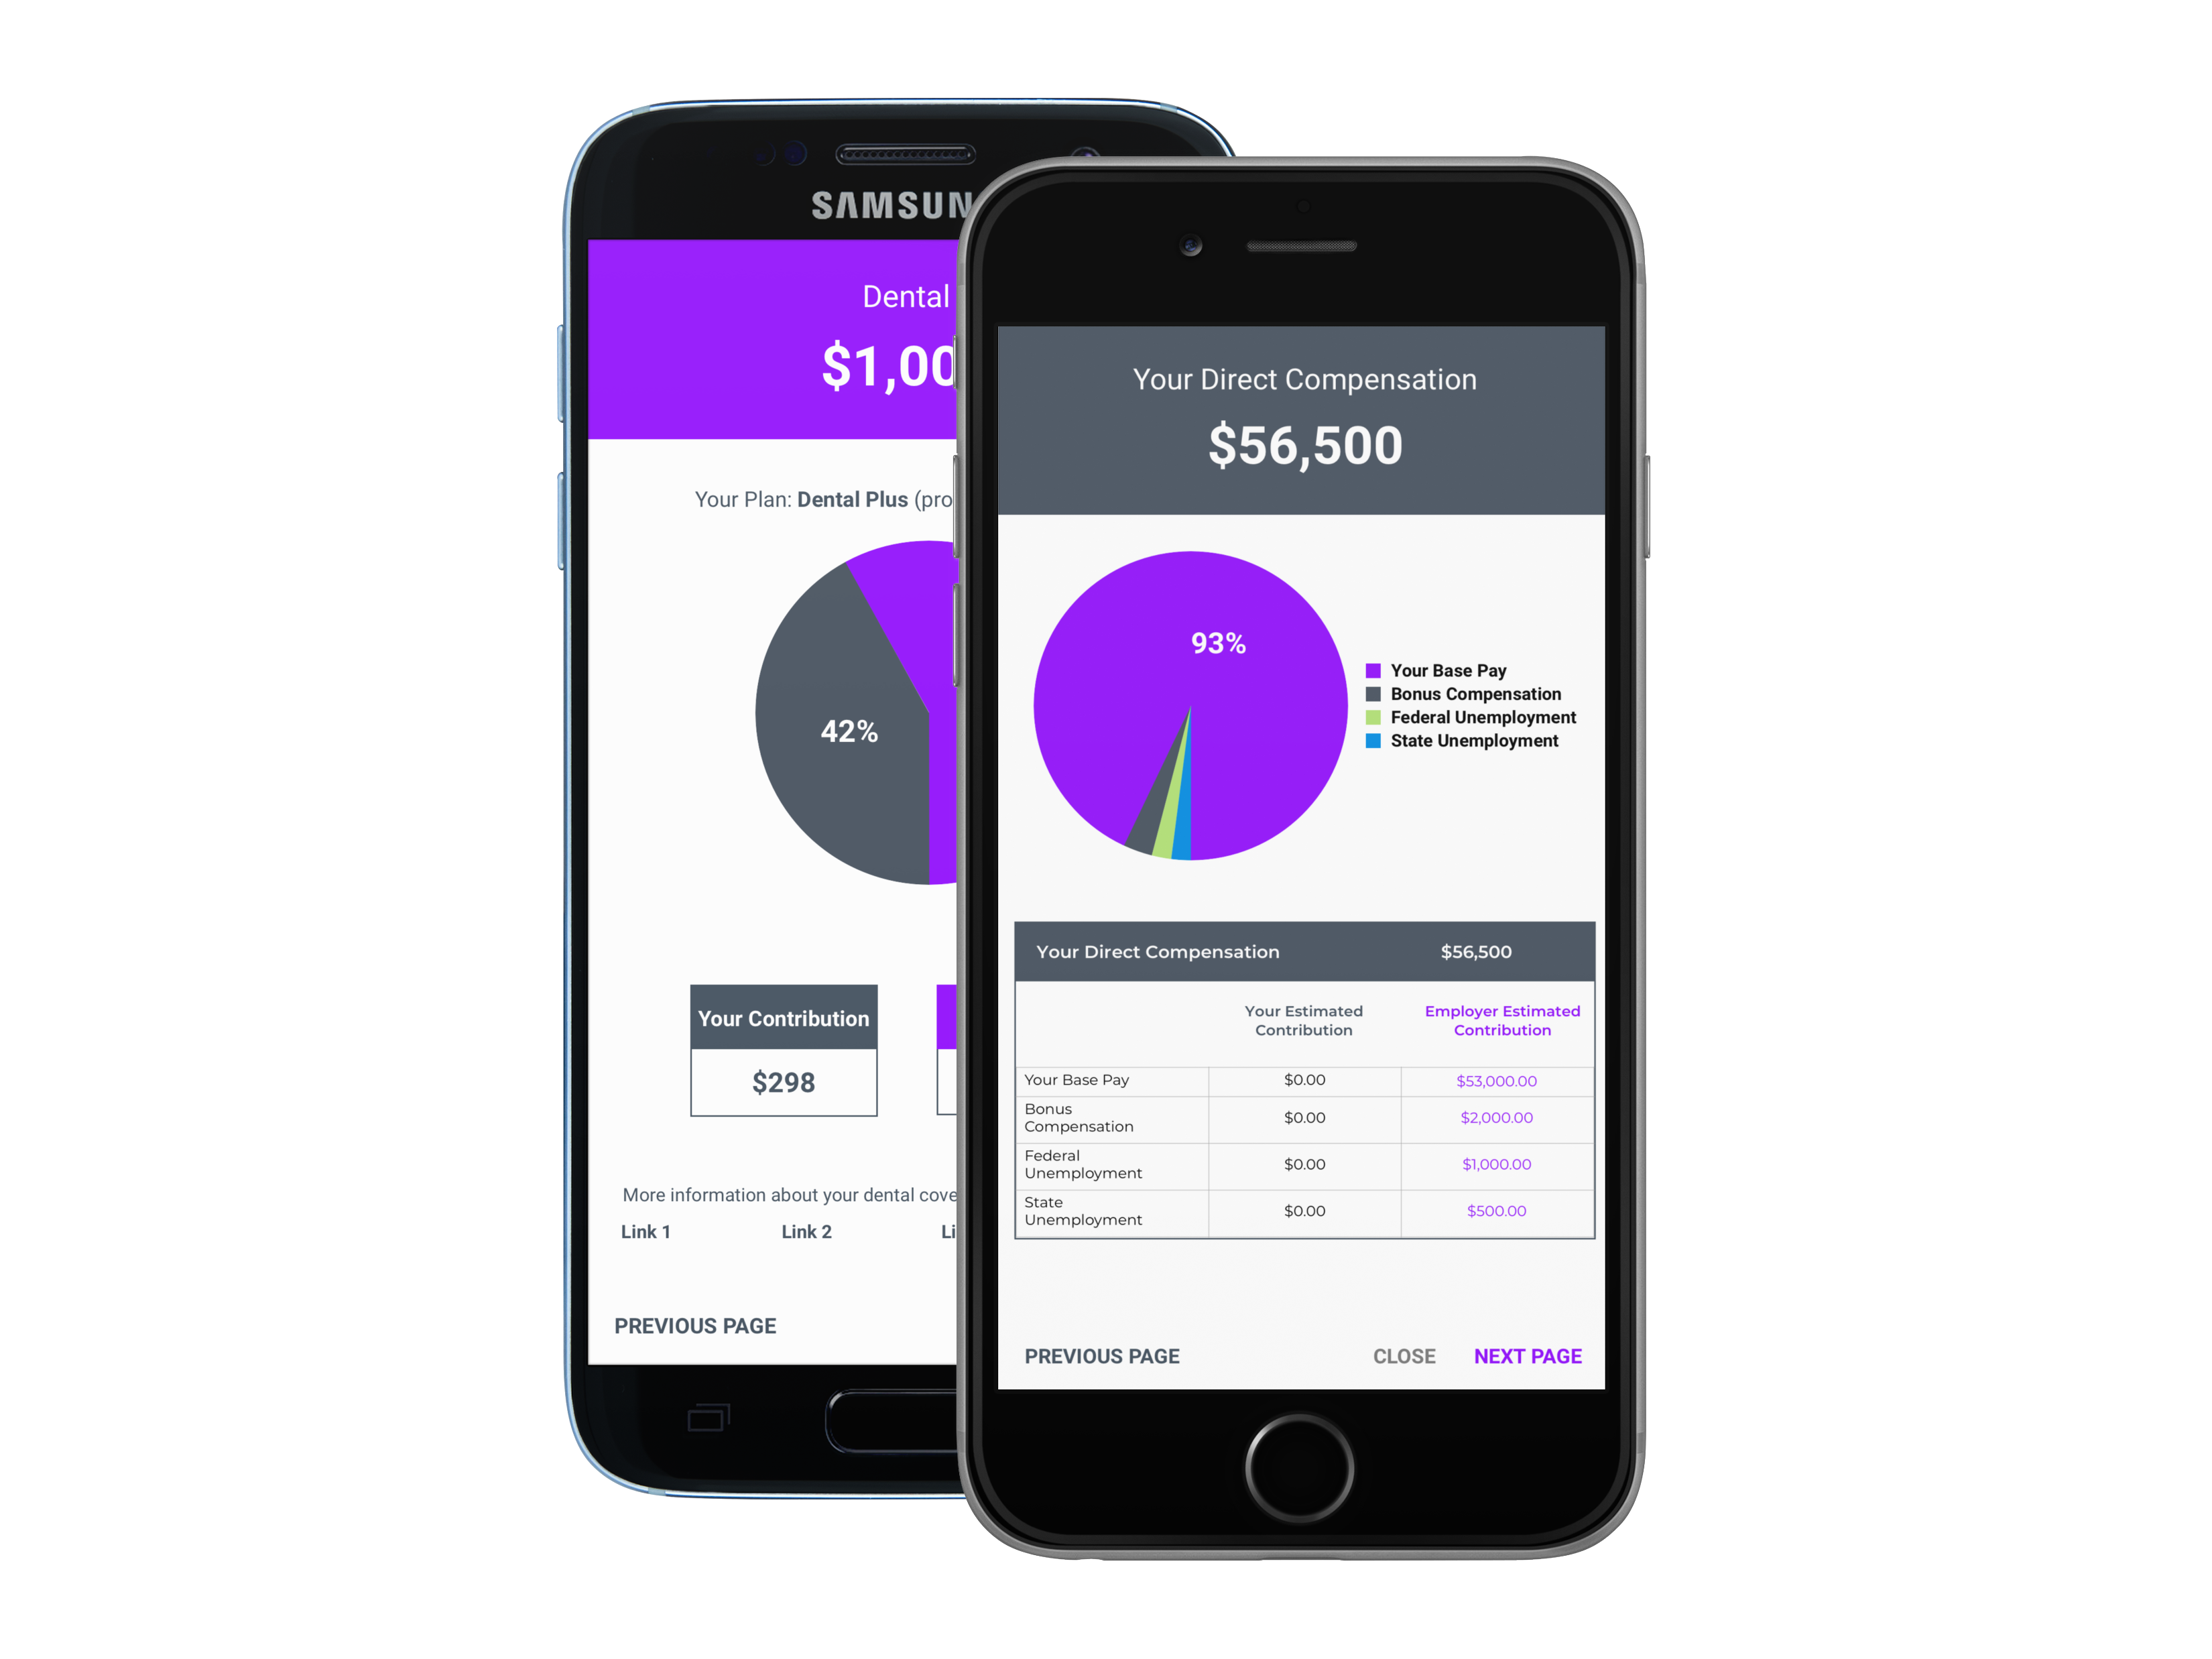 An iphone and android app to view employee benefits